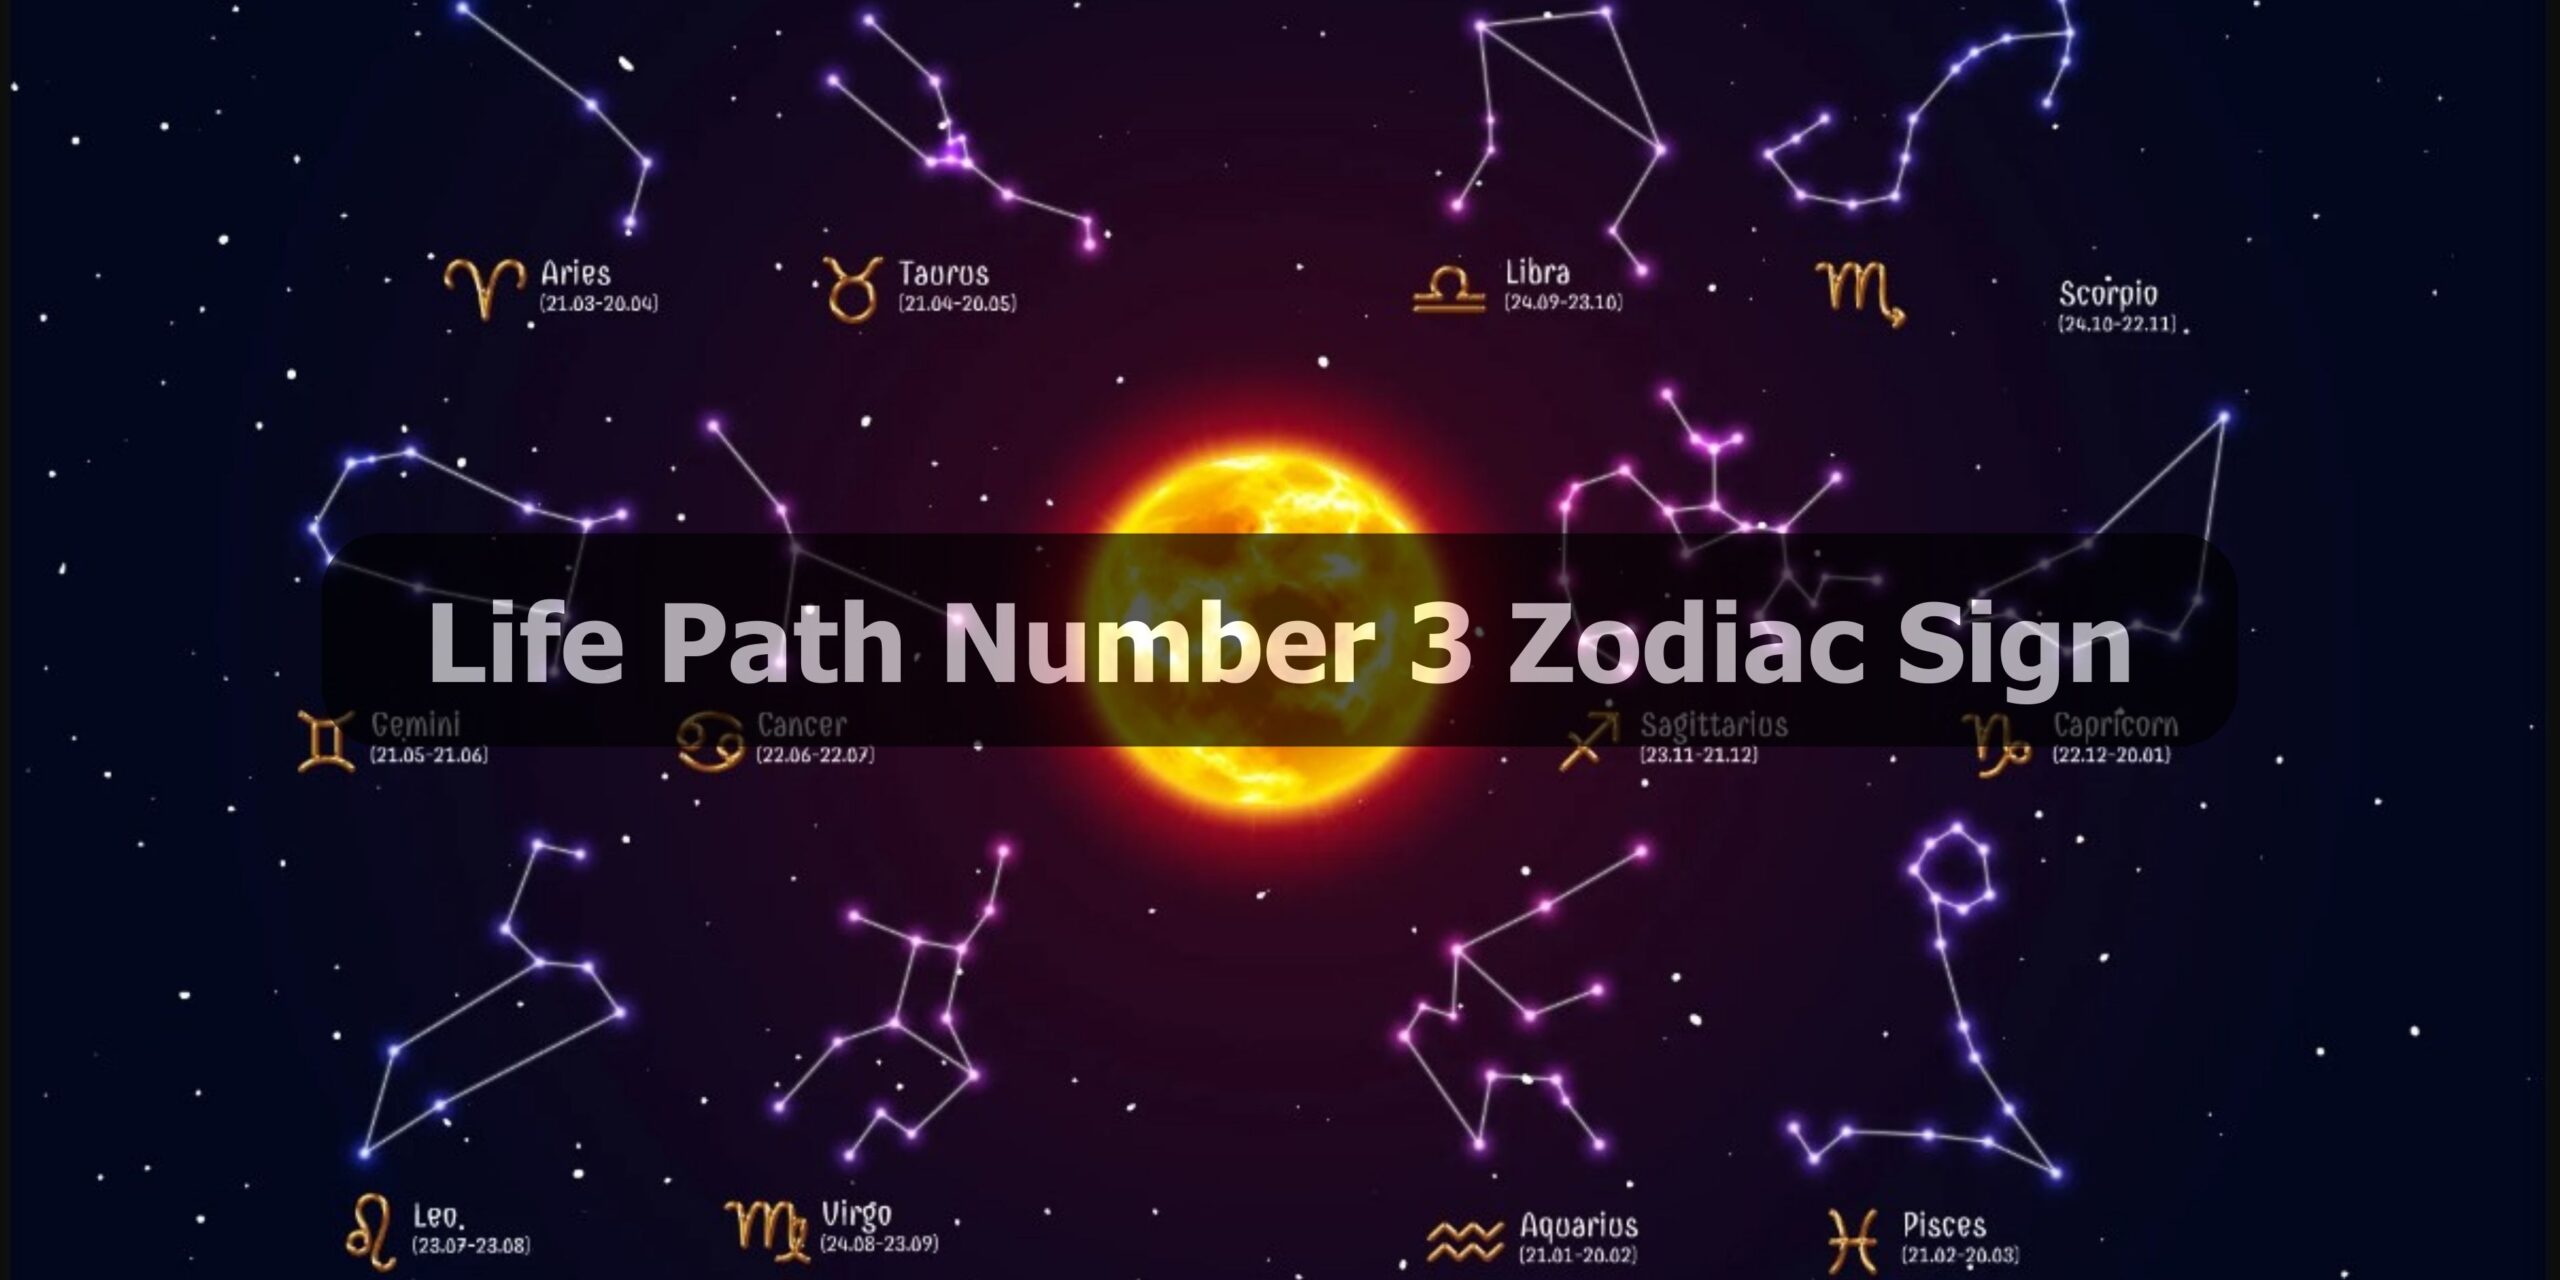 Life Path Number 3 Zodiac Sign